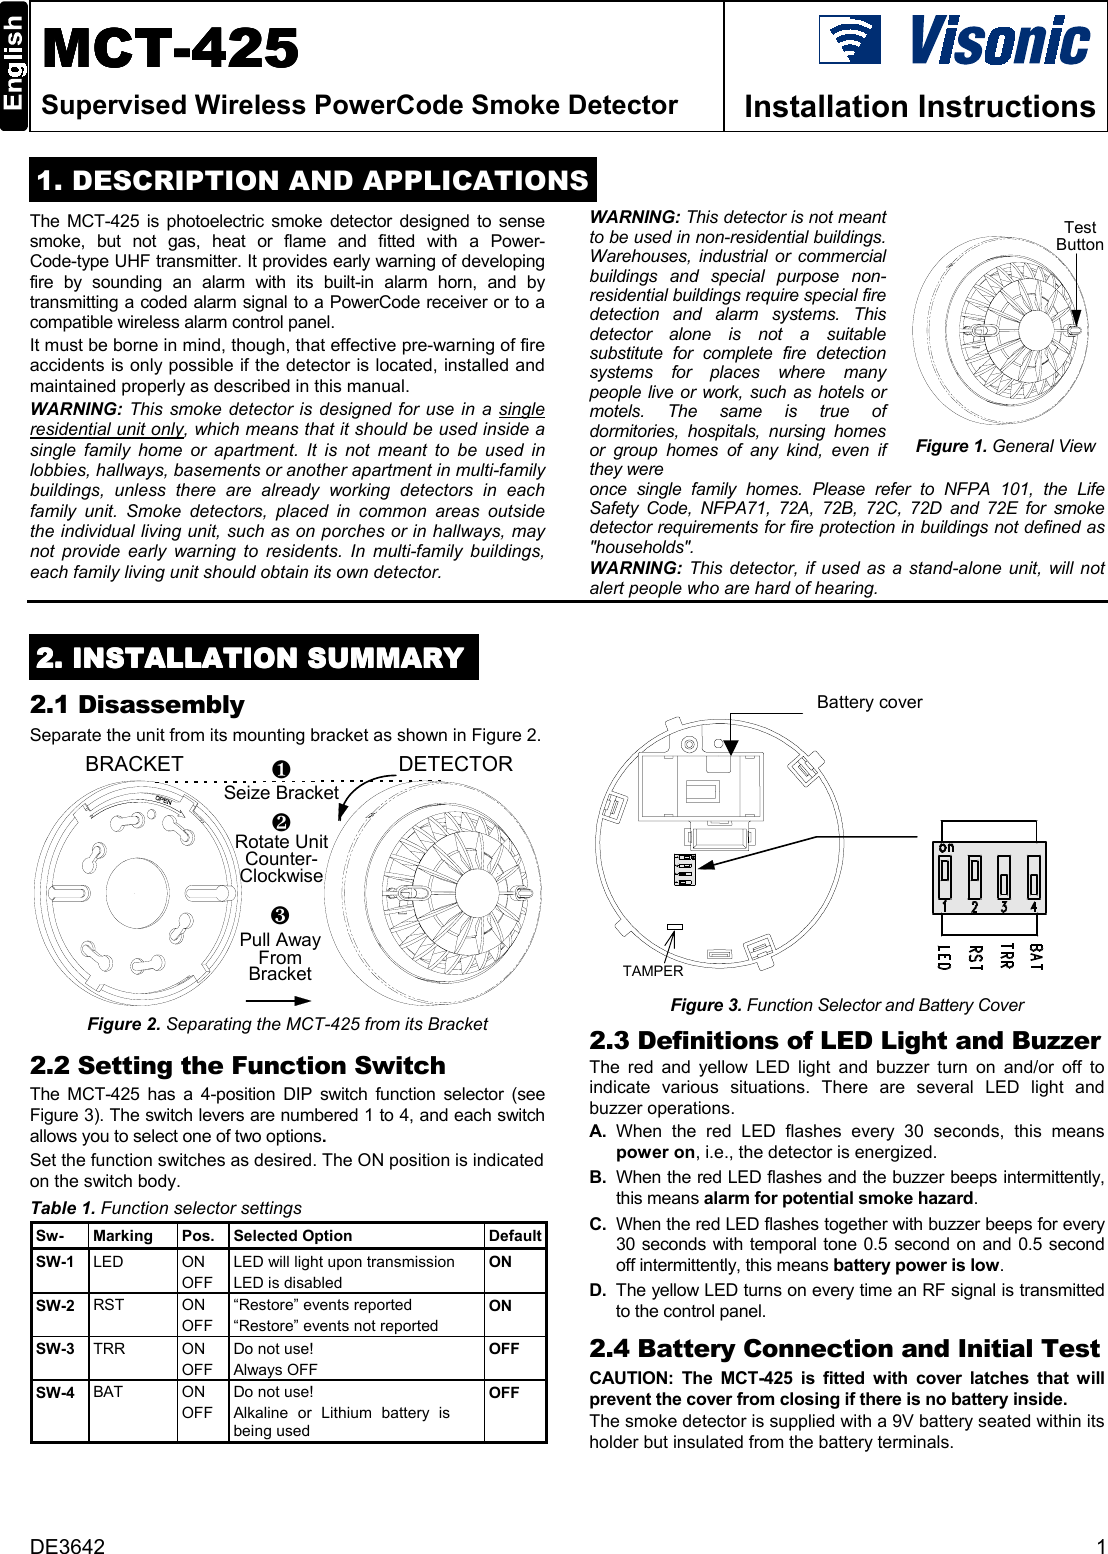 DE3642 1MCTMCTMCTMCT-425-425-425-425Supervised Wireless PowerCode Smoke Detector Installation Instructions  1. DESCRIPTION AND APPLICATIONSThe MCT-425 is photoelectric smoke detector designed to sensesmoke, but not gas, heat or flame and fitted with a Power-Code-type UHF transmitter. It provides early warning of developingfire by sounding an alarm with its built-in alarm horn, and bytransmitting a coded alarm signal to a PowerCode receiver or to acompatible wireless alarm control panel.It must be borne in mind, though, that effective pre-warning of fireaccidents is only possible if the detector is located, installed andmaintained properly as described in this manual.  WARNING: This smoke detector is designed for use in a singleresidential unit only, which means that it should be used inside asingle family home or apartment. It is not meant to be used inlobbies, hallways, basements or another apartment in multi-familybuildings, unless there are already working detectors in eachfamily unit. Smoke detectors, placed in common areas outsidethe individual living unit, such as on porches or in hallways, maynot provide early warning to residents. In multi-family buildings,each family living unit should obtain its own detector.WARNING: This detector is not meantto be used in non-residential buildings.Warehouses, industrial or commercialbuildings and special purpose non-residential buildings require special firedetection and alarm systems. Thisdetector alone is not a suitablesubstitute for complete fire detectionsystems for places where manypeople live or work, such as hotels ormotels. The same is true ofdormitories, hospitals, nursing homesor group homes of any kind, even ifthey were  Figure 1. General Viewonce single family homes. Please refer to NFPA 101, the LifeSafety Code, NFPA71, 72A, 72B, 72C, 72D and 72E for smokedetector requirements for fire protection in buildings not defined as&quot;households&quot;.WARNING: This detector, if used as a stand-alone unit, will notalert people who are hard of hearing.2222. INSTALLATION SUMMARY. INSTALLATION SUMMARY. INSTALLATION SUMMARY. INSTALLATION SUMMARY2.1 DisassemblySeparate the unit from its mounting bracket as shown in Figure 2.Figure 2. Separating the MCT-425 from its Bracket2.2 Setting the Function SwitchThe MCT-425 has a 4-position DIP switch function selector (seeFigure 3). The switch levers are numbered 1 to 4, and each switchallows you to select one of two options.Set the function switches as desired. The ON position is indicatedon the switch body.Table 1. Function selector settingsSw- Marking Pos. Selected Option DefaultSW-1 LED ONOFFLED will light upon transmissionLED is disabledONSW-2 RST ONOFF“Restore” events reported“Restore” events not reportedONSW-3 TRR ONOFFDo not use!Always OFFOFFSW-4 BAT ONOFFDo not use!Alkaline or Lithium battery isbeing usedOFFBattery cover Figure 3. Function Selector and Battery Cover2.3 Definitions of LED Light and BuzzerThe red and yellow LED light and buzzer turn on and/or off toindicate various situations. There are several LED light andbuzzer operations.A. When the red LED flashes every 30 seconds, this meanspower on, i.e., the detector is energized.B. When the red LED flashes and the buzzer beeps intermittently,this means alarm for potential smoke hazard.C. When the red LED flashes together with buzzer beeps for every30 seconds with temporal tone 0.5 second on and 0.5 secondoff intermittently, this means battery power is low.D. The yellow LED turns on every time an RF signal is transmittedto the control panel.2.4 Battery Connection and Initial TestCAUTION: The MCT-425 is fitted with cover latches that willprevent the cover from closing if there is no battery inside.  The smoke detector is supplied with a 9V battery seated within itsholder but insulated from the battery terminals.BRACKET DETECTOR❷Rotate UnitCounter-Clockwise❶Seize Bracket❸Pull AwayFromBracketTestButtonTAMPER